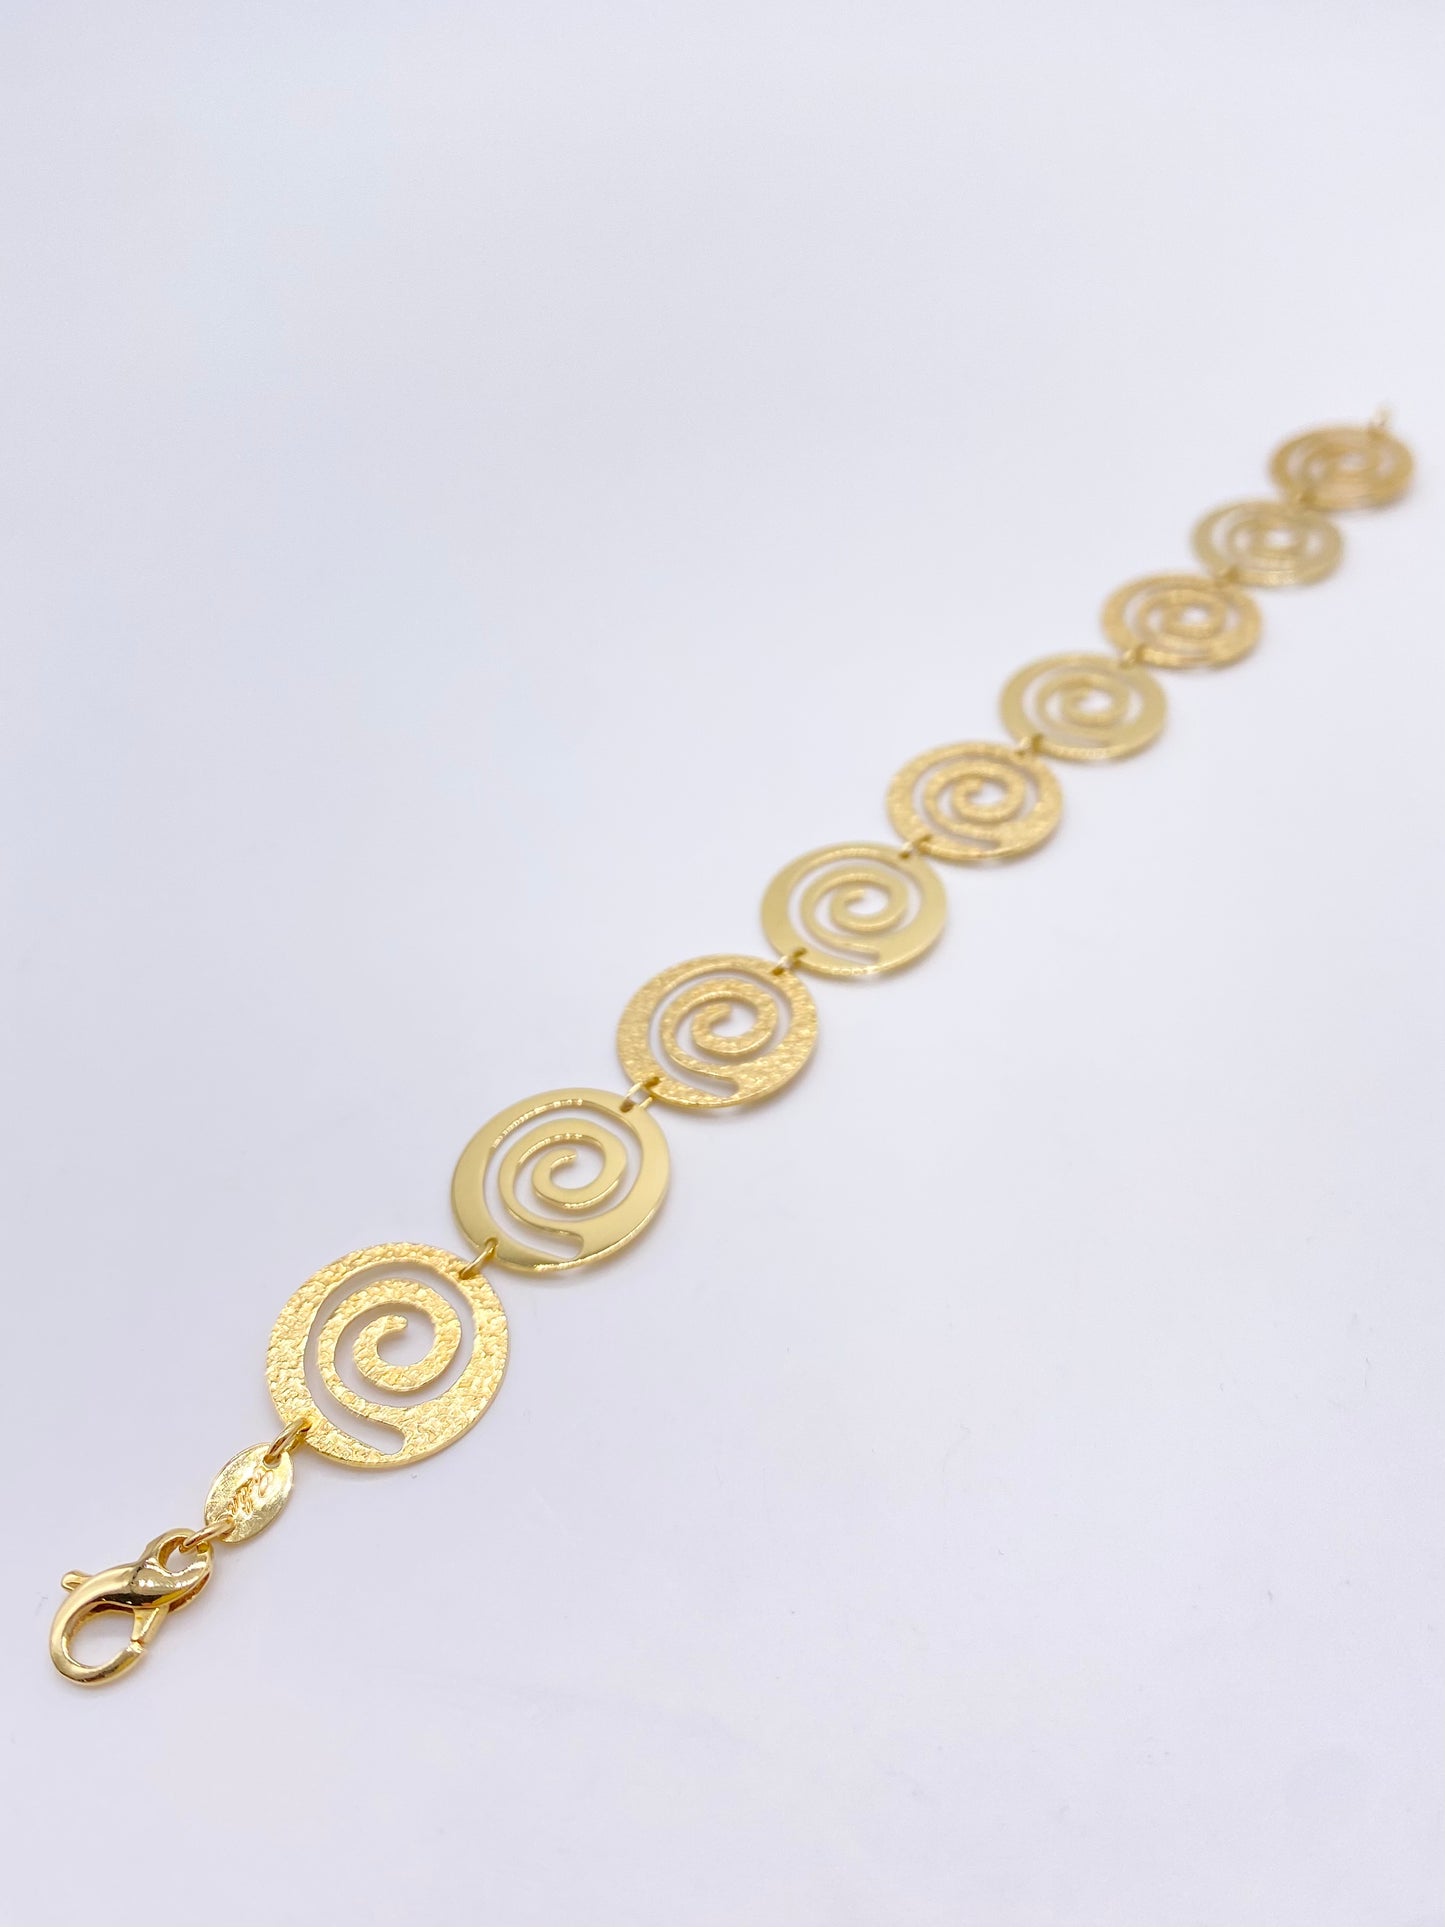 Yellow gold bracelet with spirals